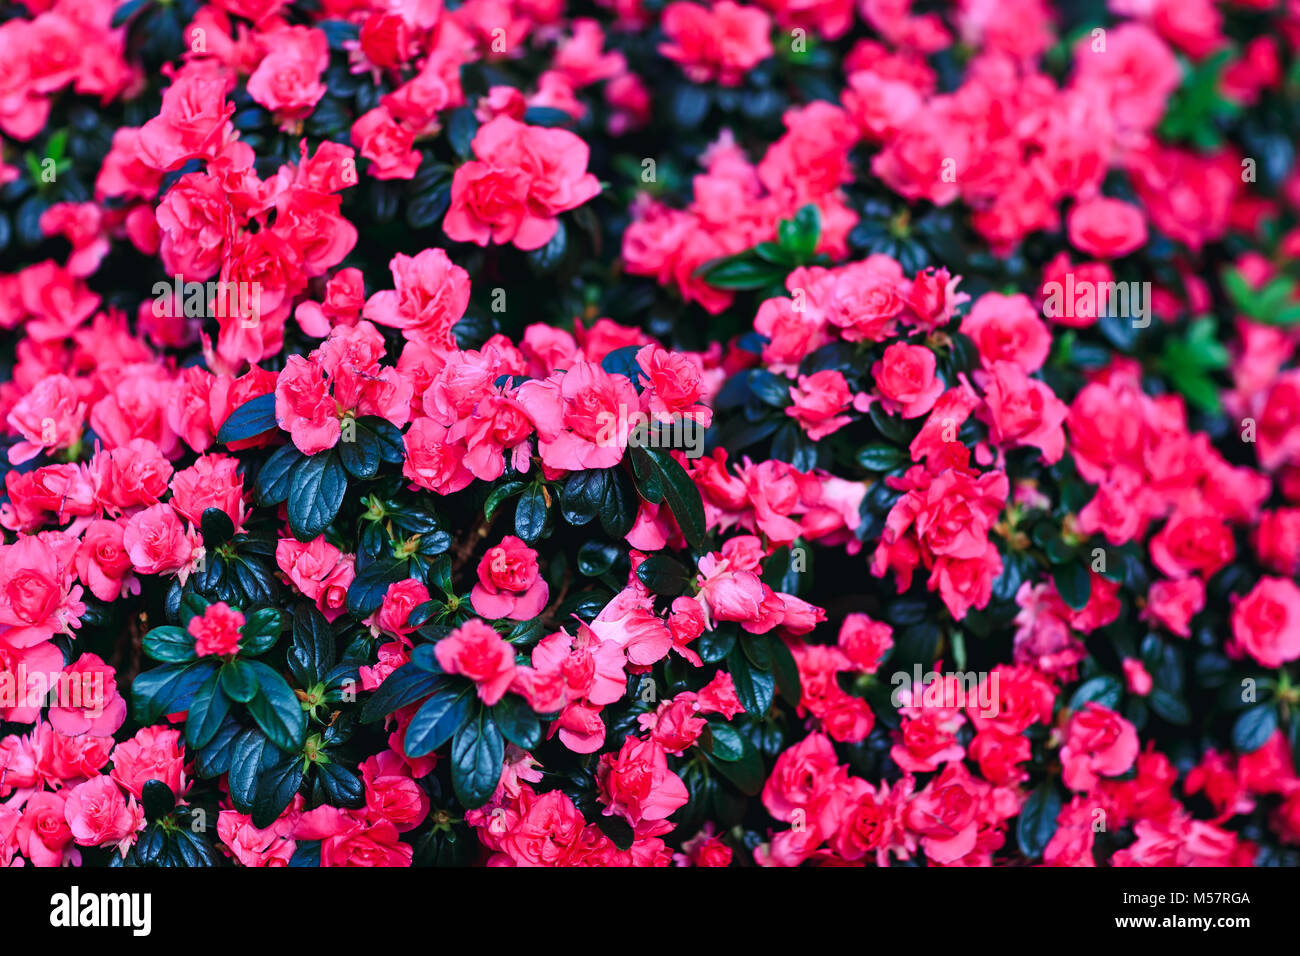 Beautiful red wax begonias flower background. Fresh begonia plants in amazing floral decor. Best picture of the red floral decoration, with semperflor Stock Photo